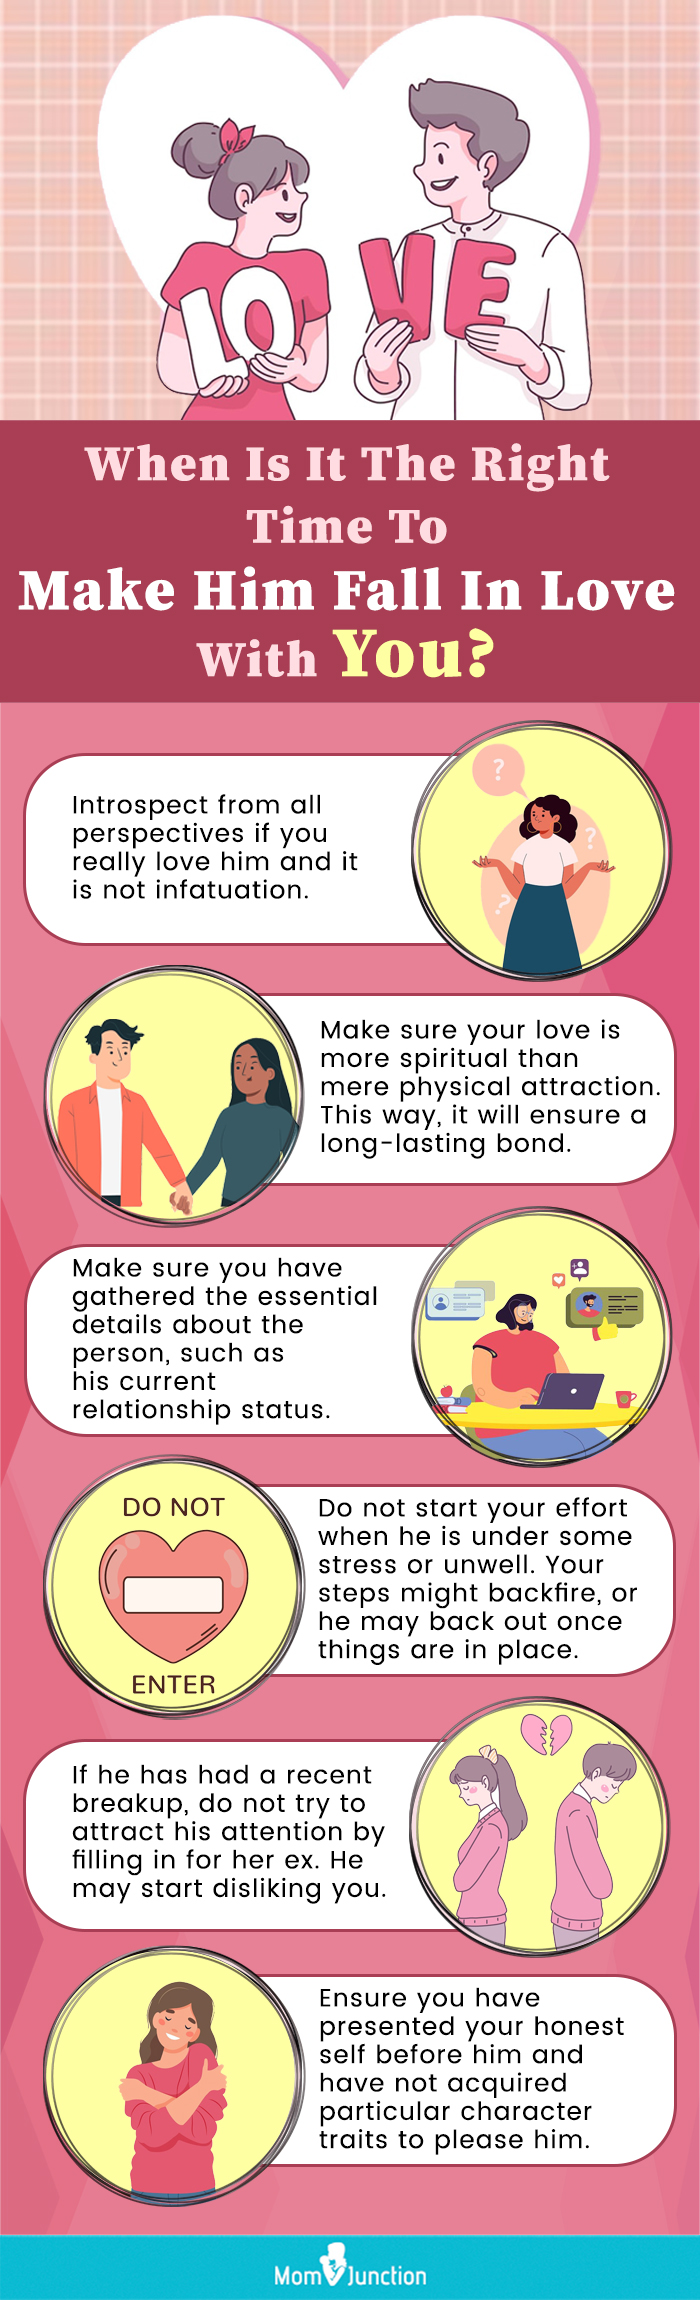 right time to make him fall in love with you [infographic]